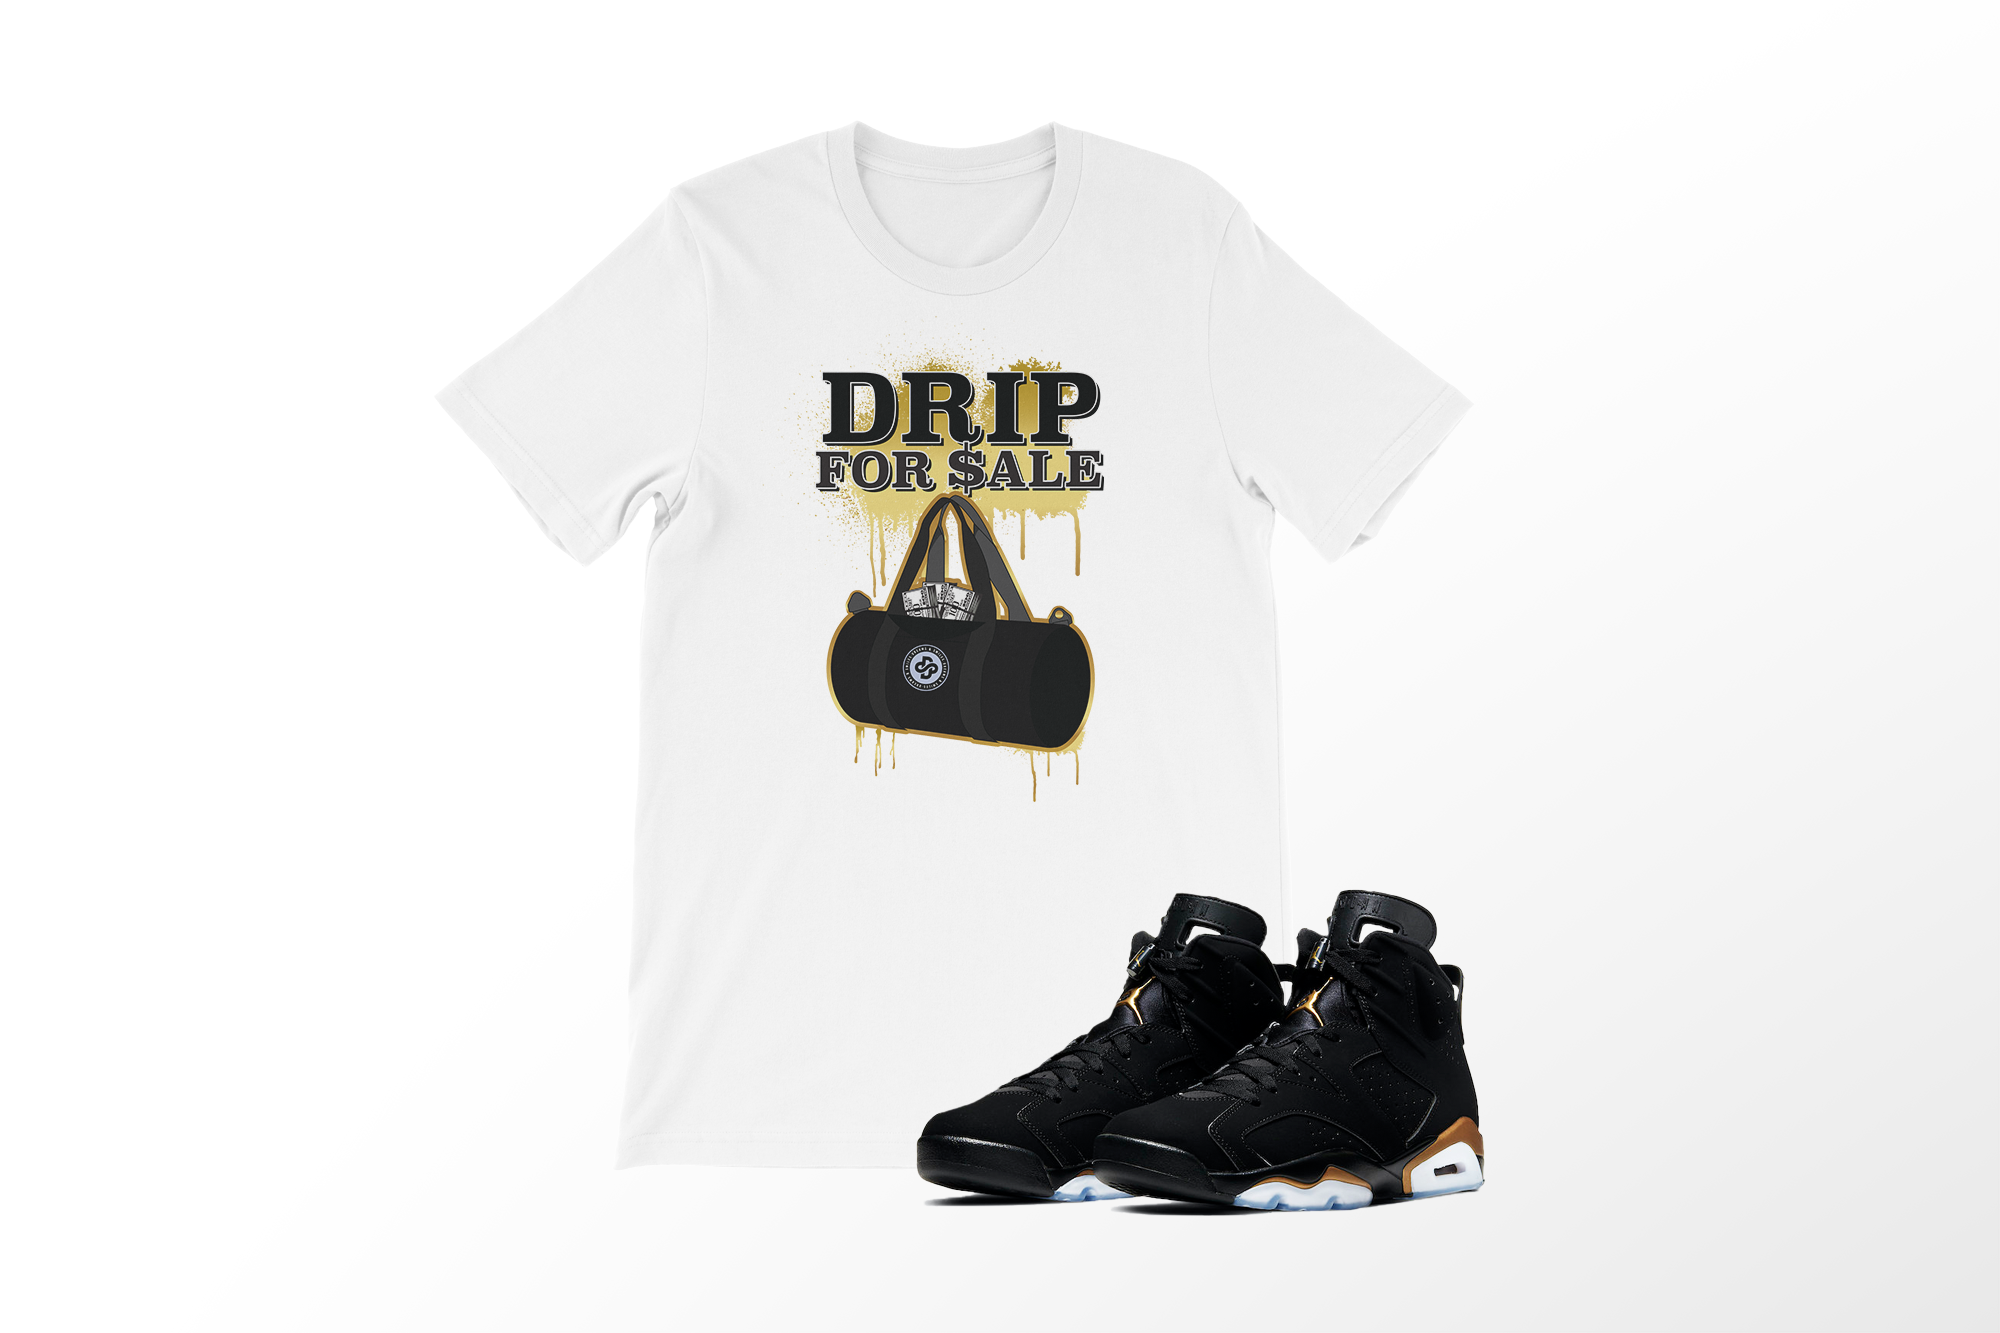 'Drip For Sale' in DMP CW Women's Slim Fit Tee